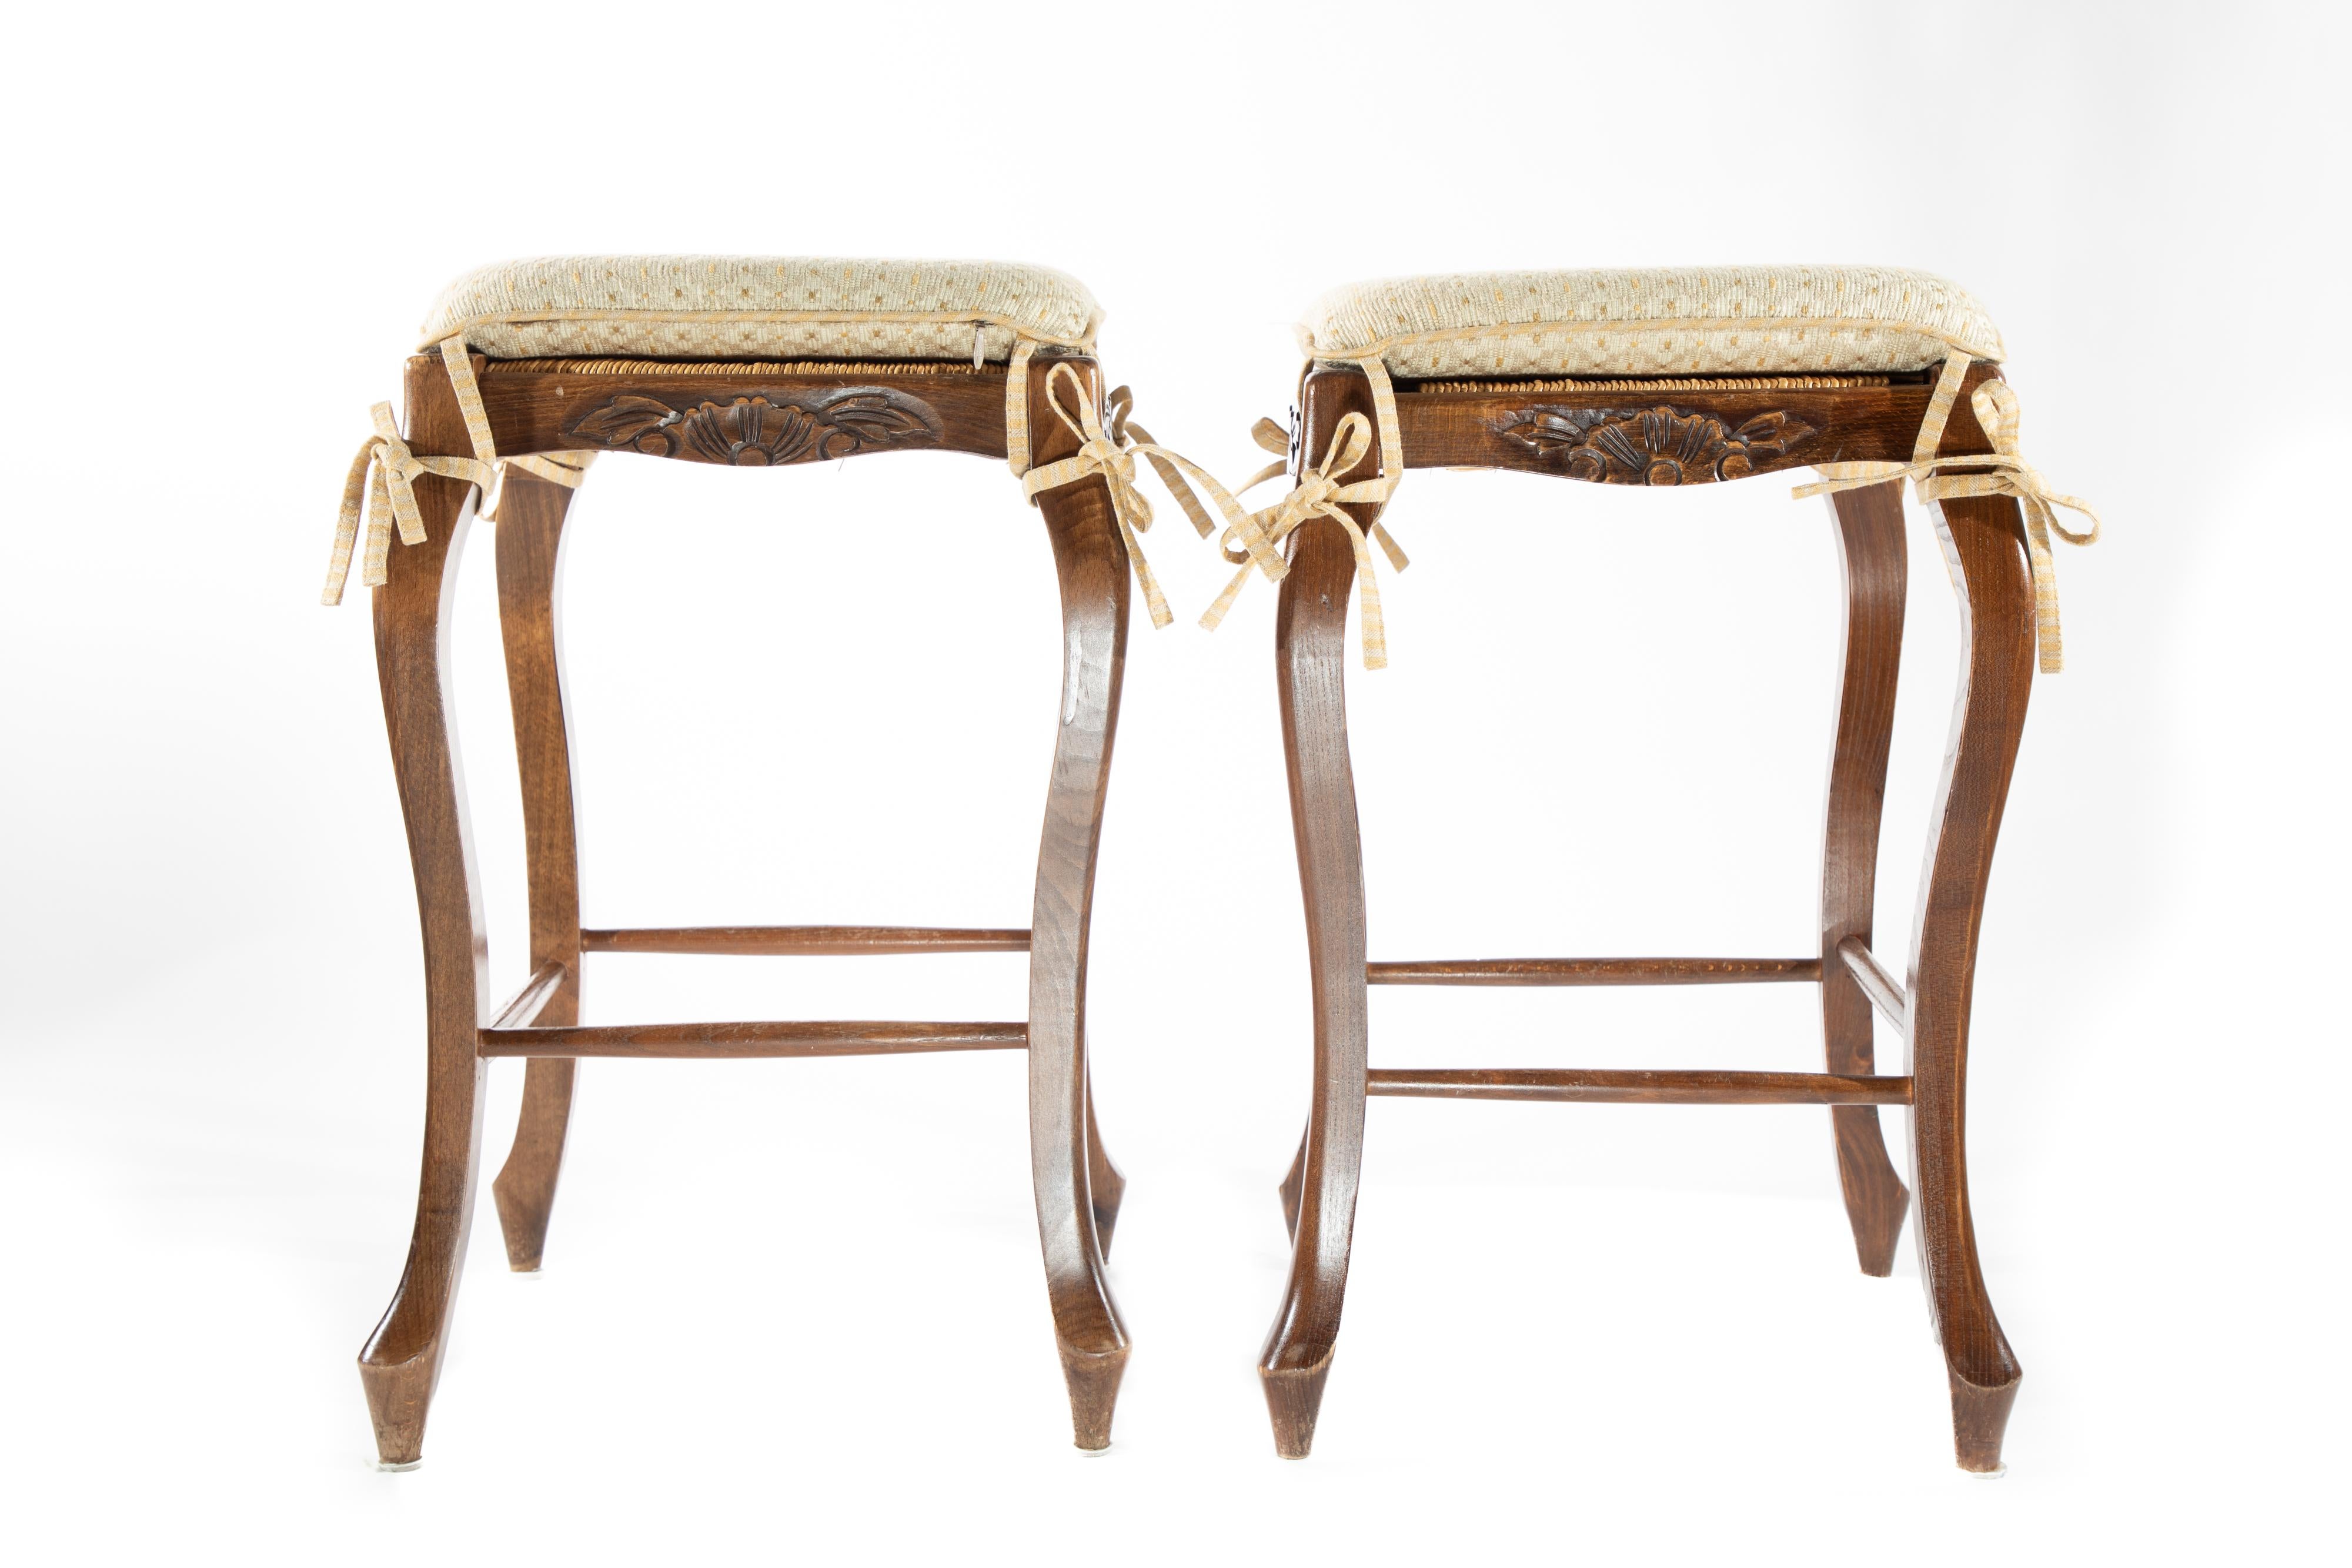 Pair of stools with rush woven seats.

2